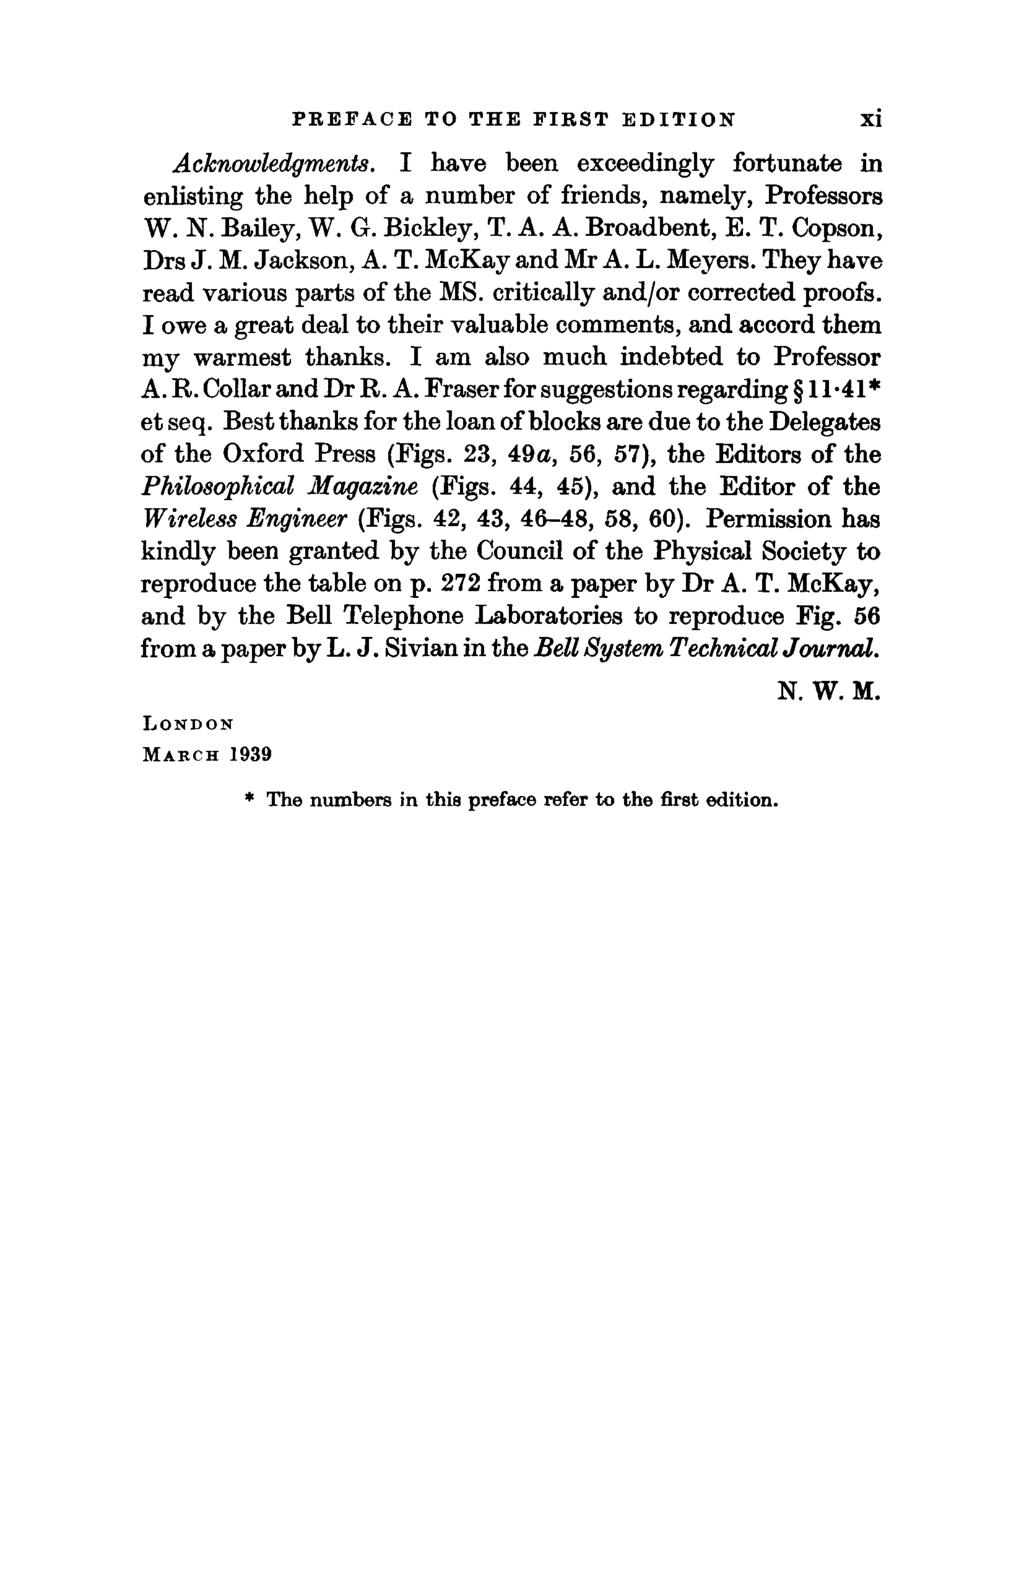 PREFACE TO THE FIRST EDITION Acknowledgments. I have been exceedingly fortunate in enlisting the help of a number of friends, namely, Professors W. N. Bailey, W. G. Bickley, T. A. A. Broadbent, E. T. Copson, Drs J.